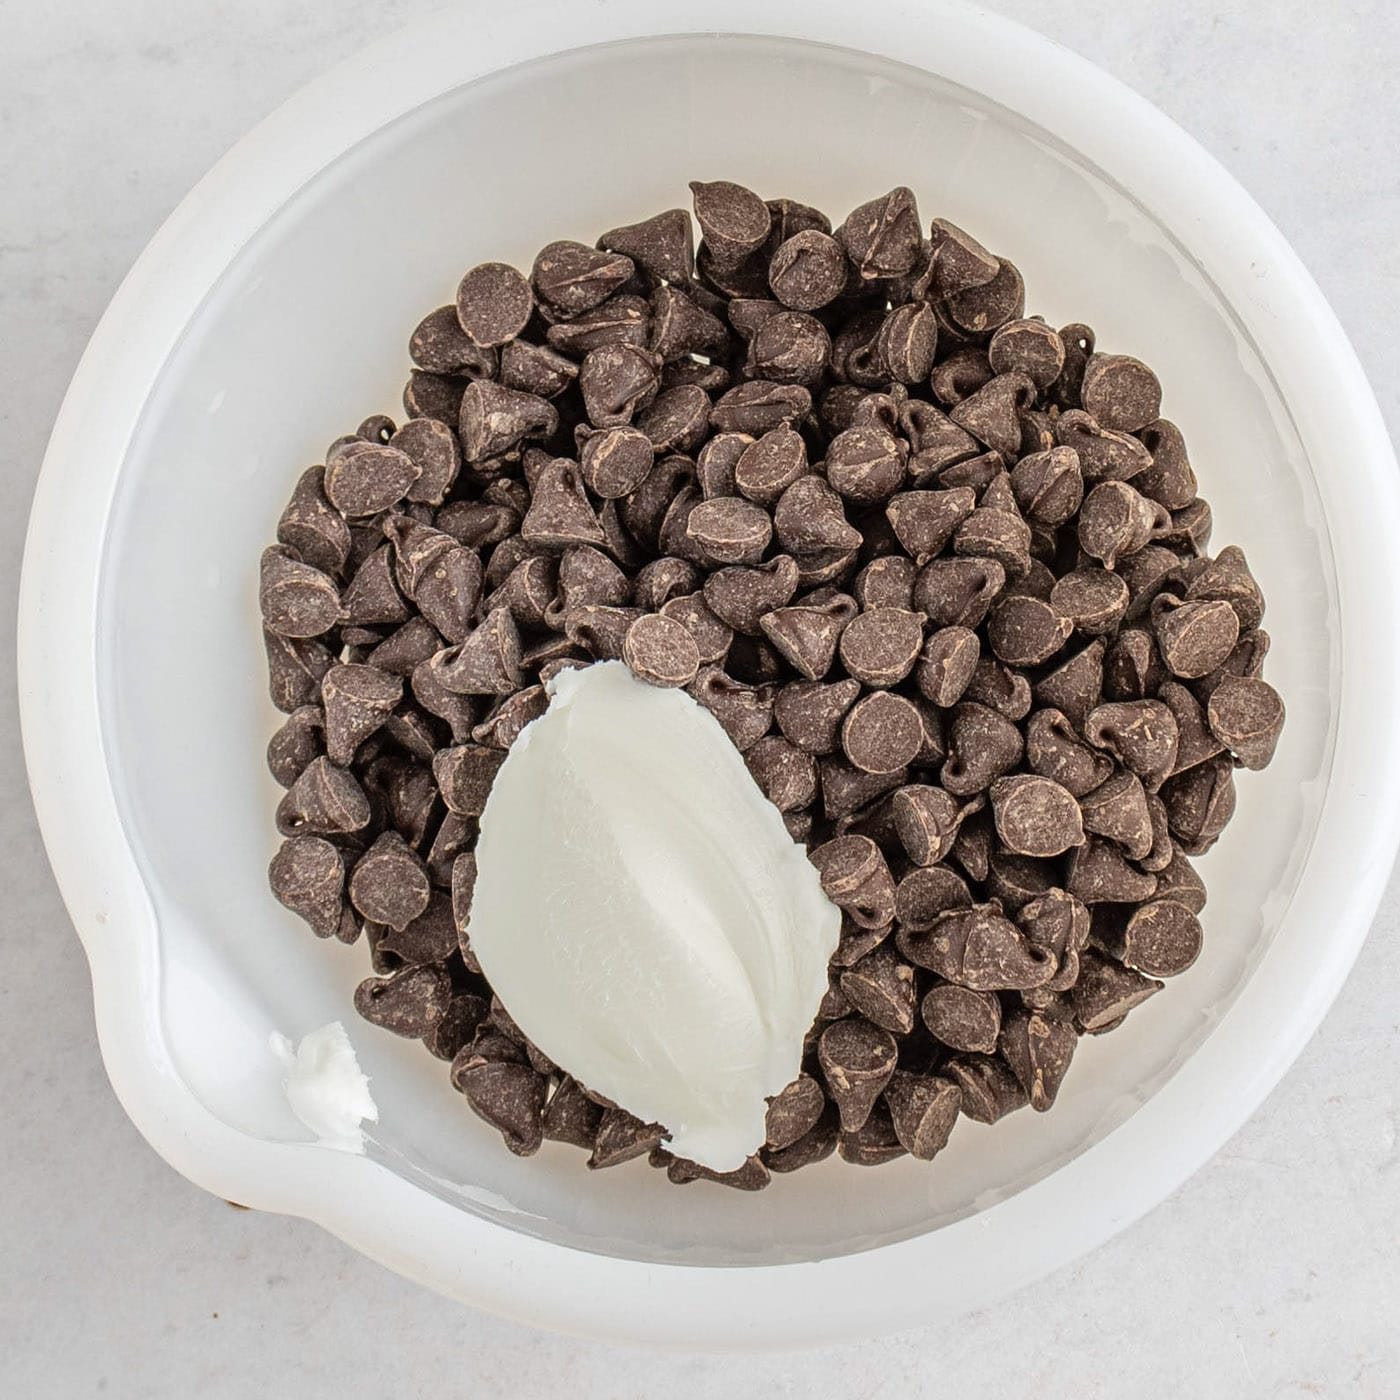 chocolate chips and crisco in a bowl